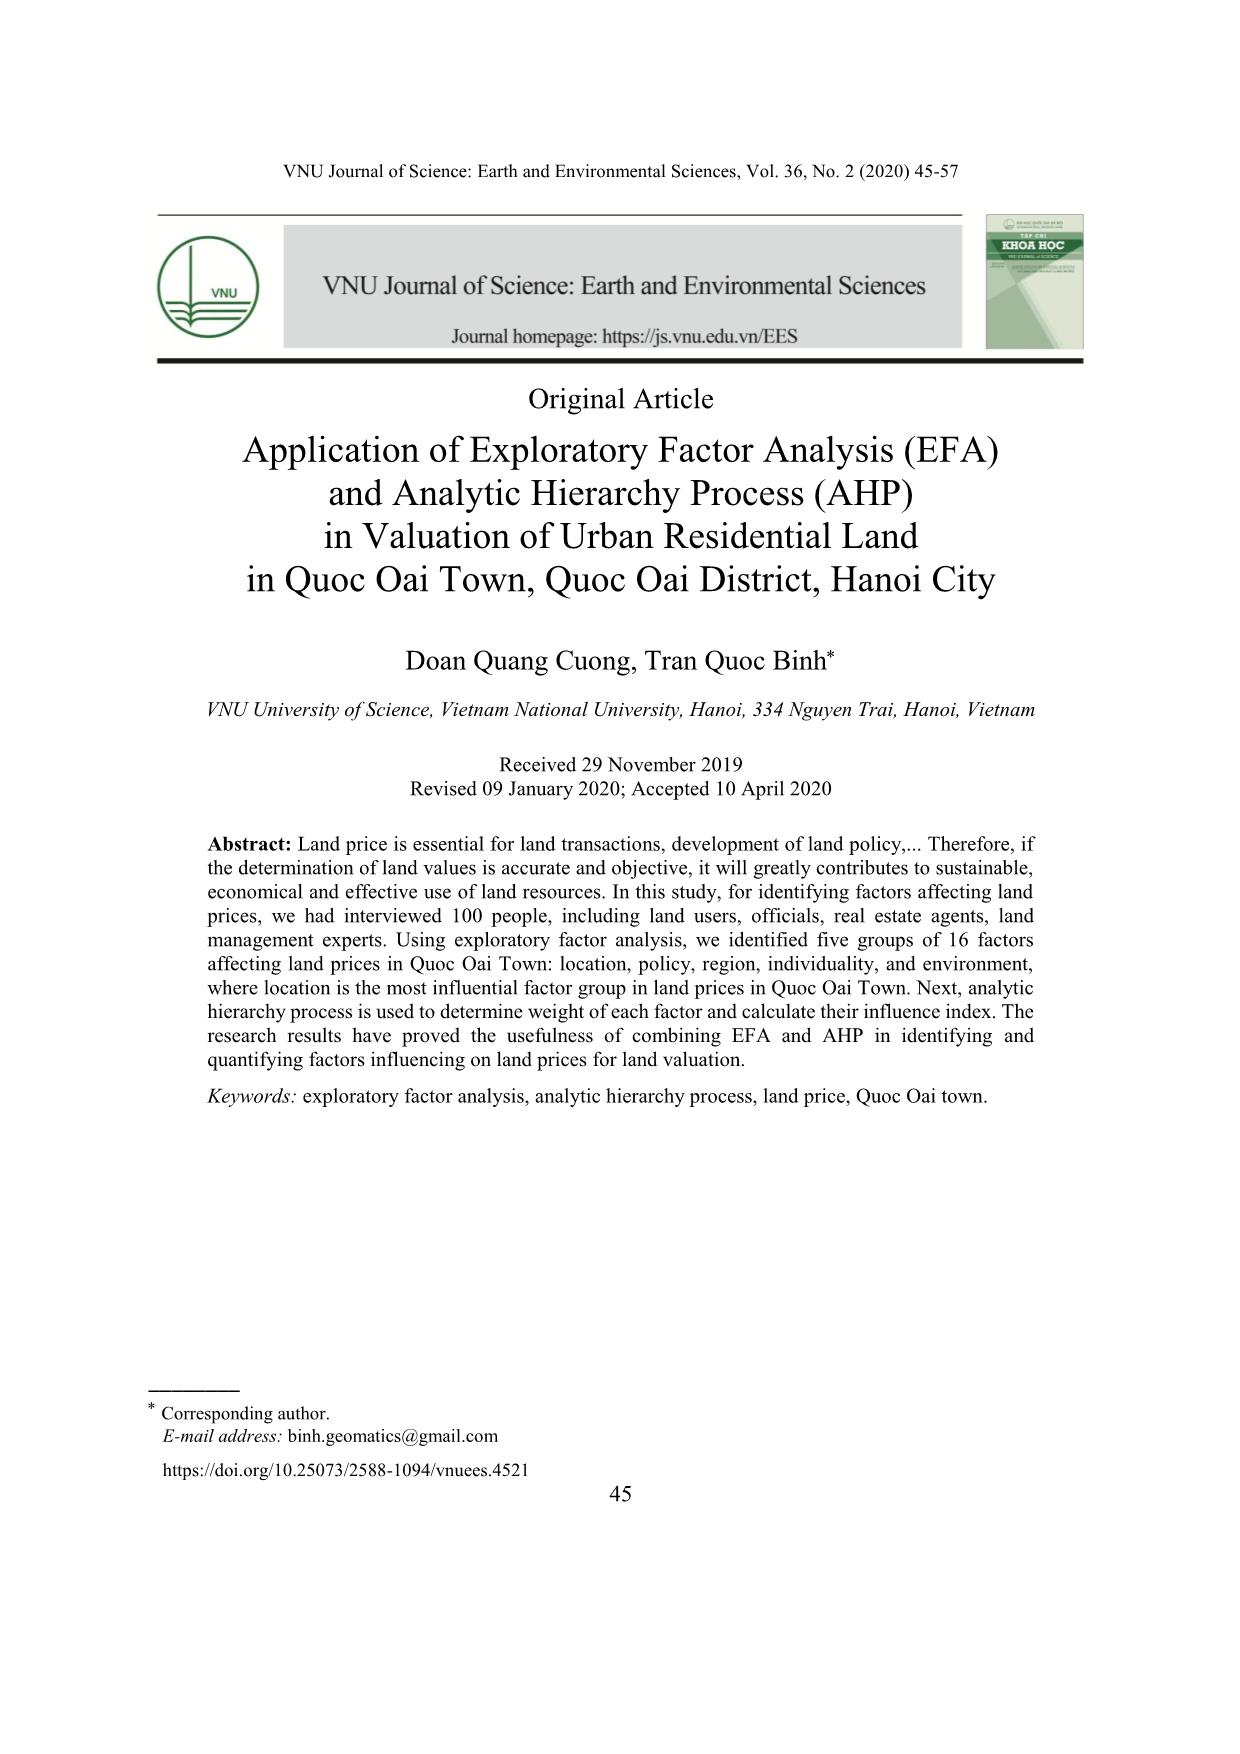 Application of Exploratory Factor Analysis (EFA) and Analytic Hierarchy Process (AHP) in Valuation of Urban Residential Land in Quoc Oai Town, Quoc Oai District, Hanoi City trang 1